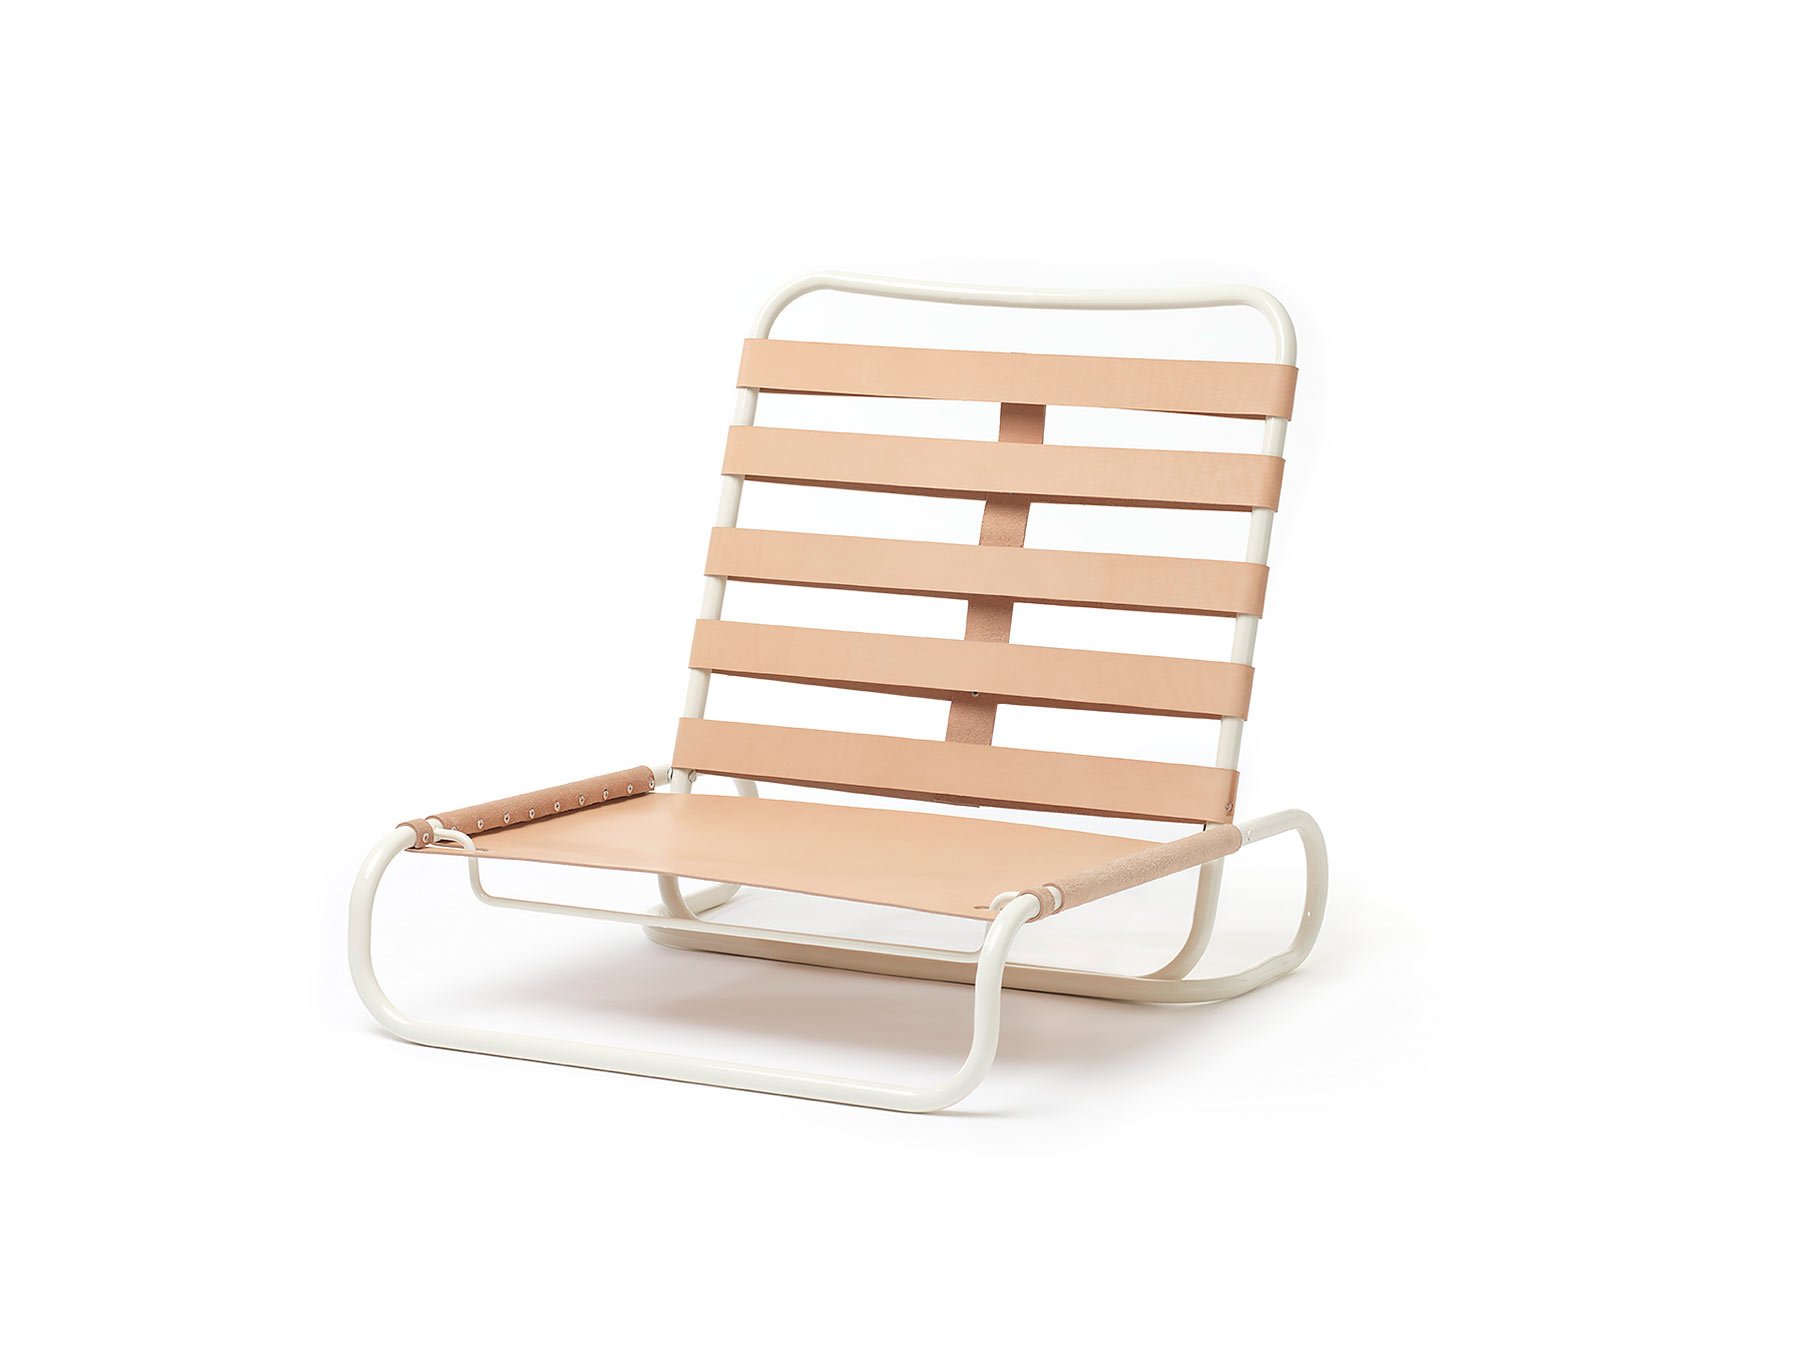 Compact Folding Chair By Glen Baghurst 8 